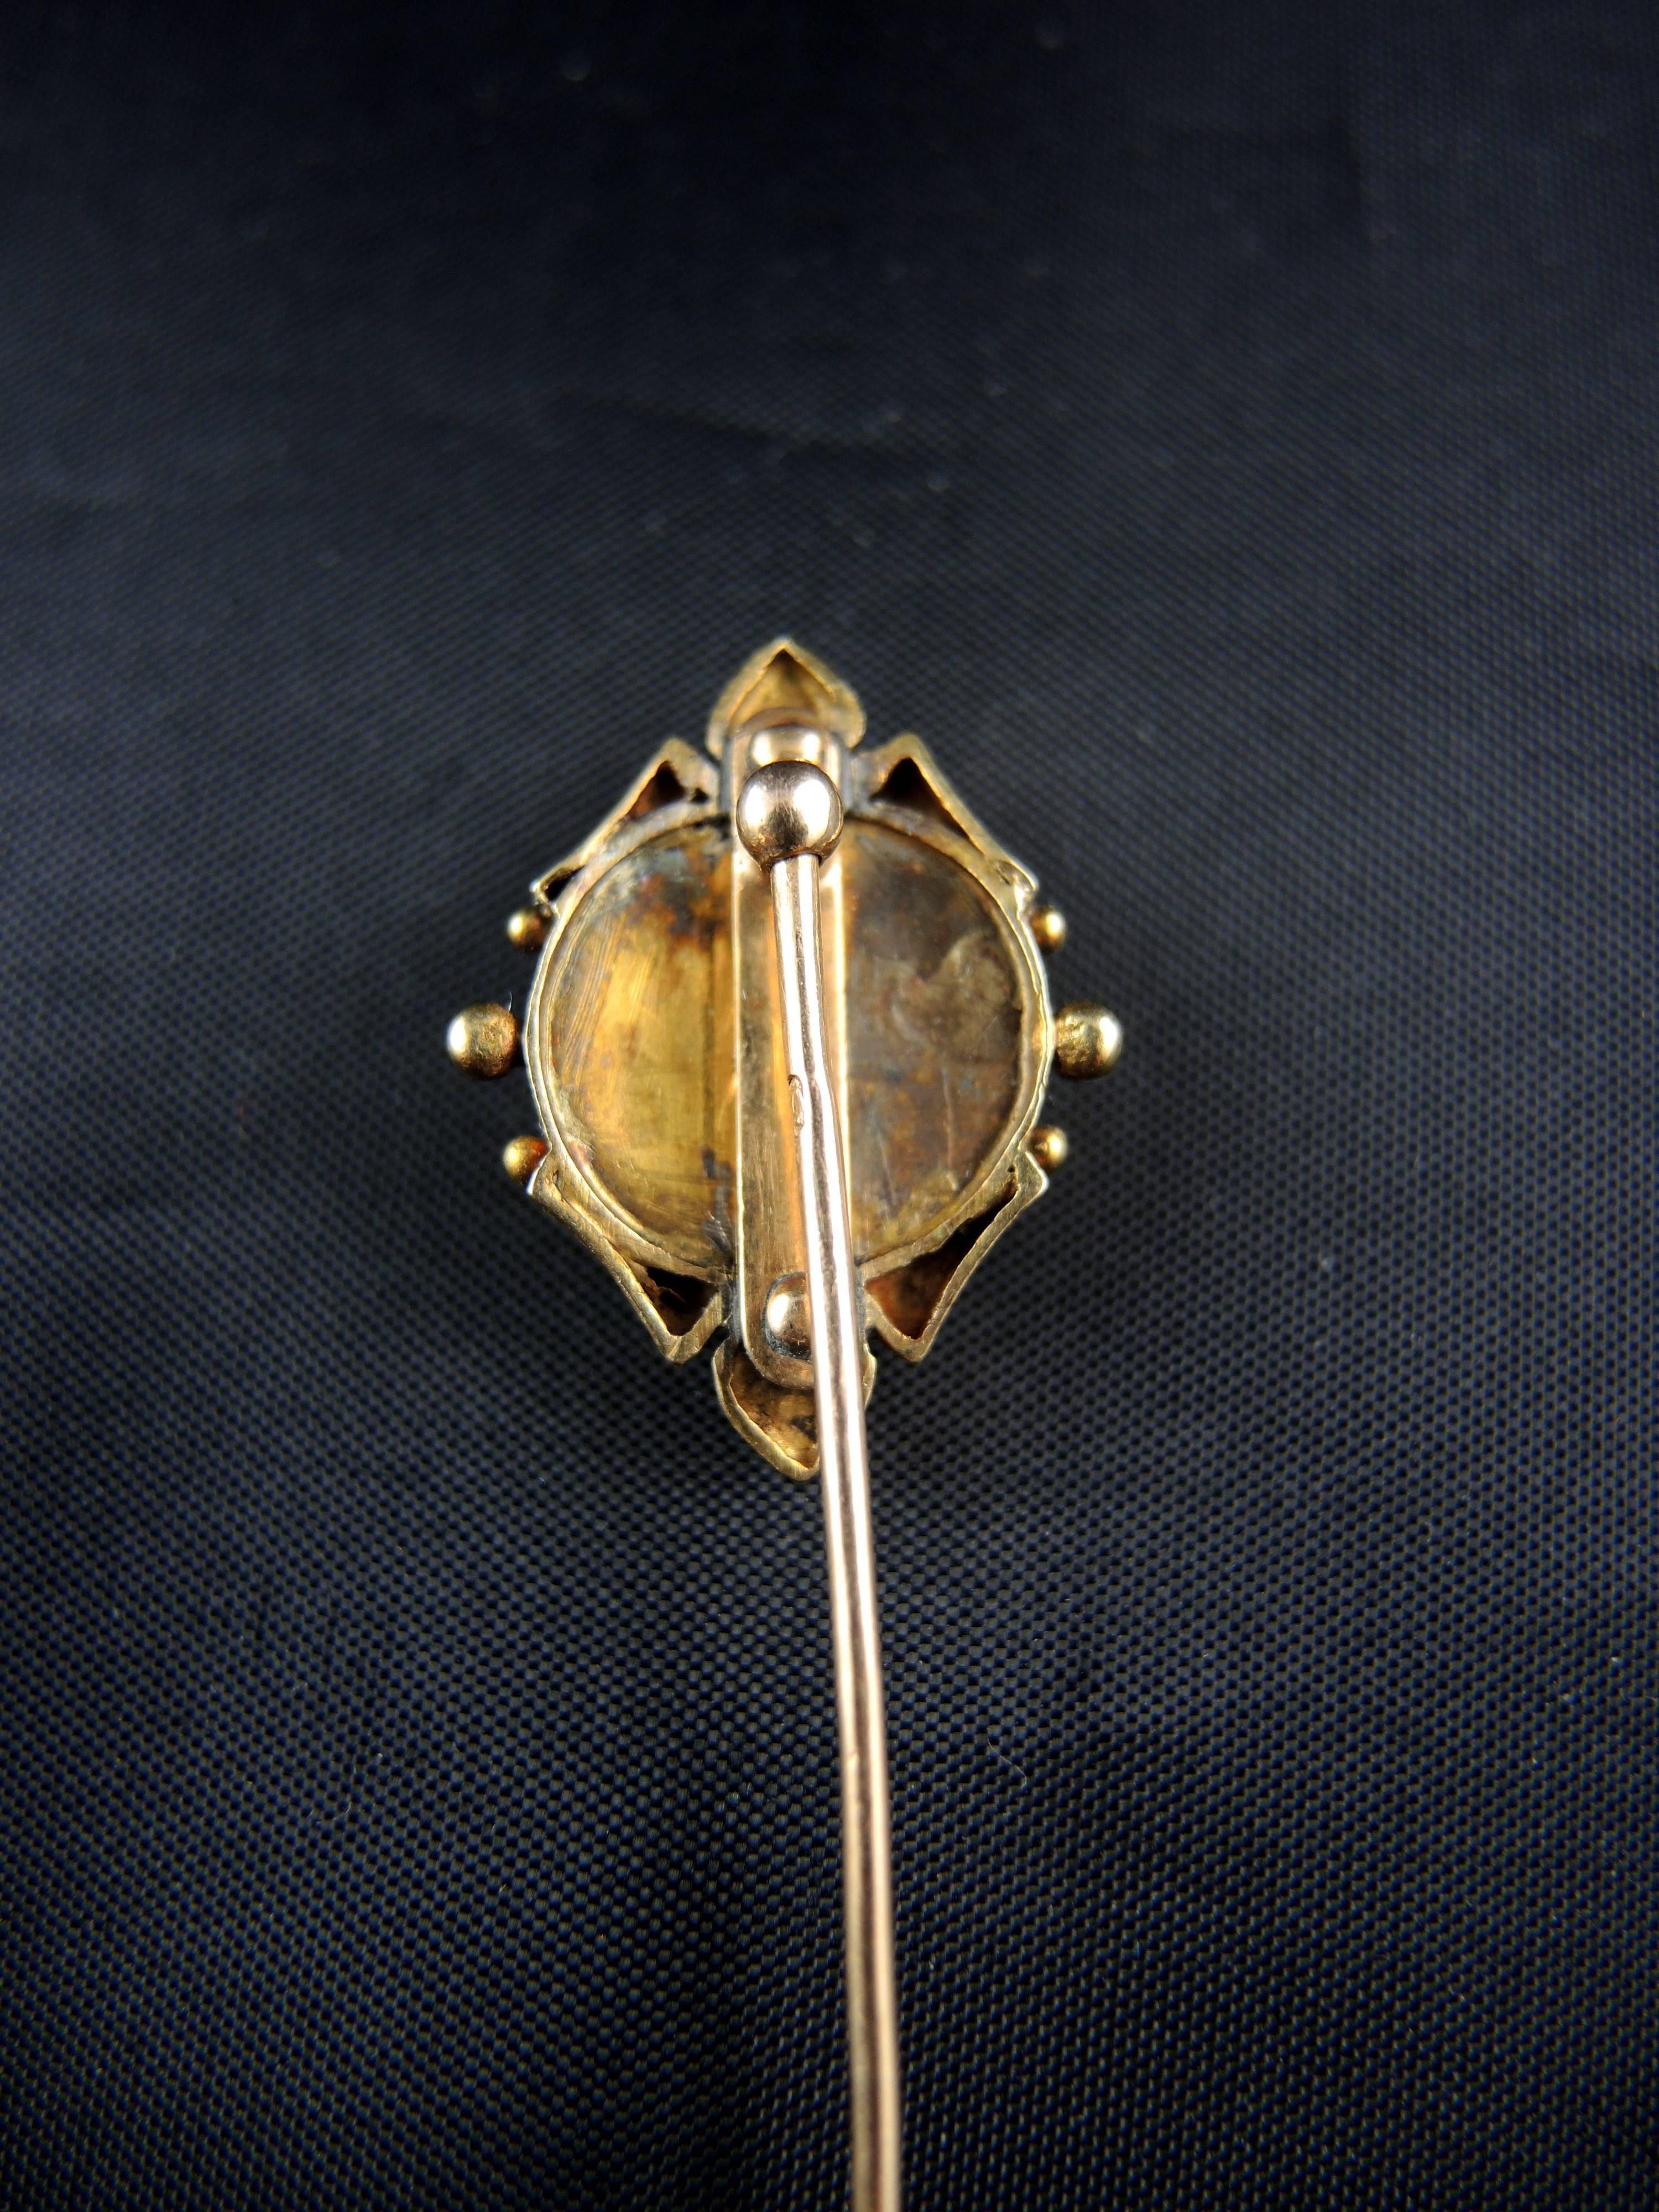 Women's or Men's Etruscan Revival Gold Pin with Scarab Beetle Micro Mosaic circa 1850